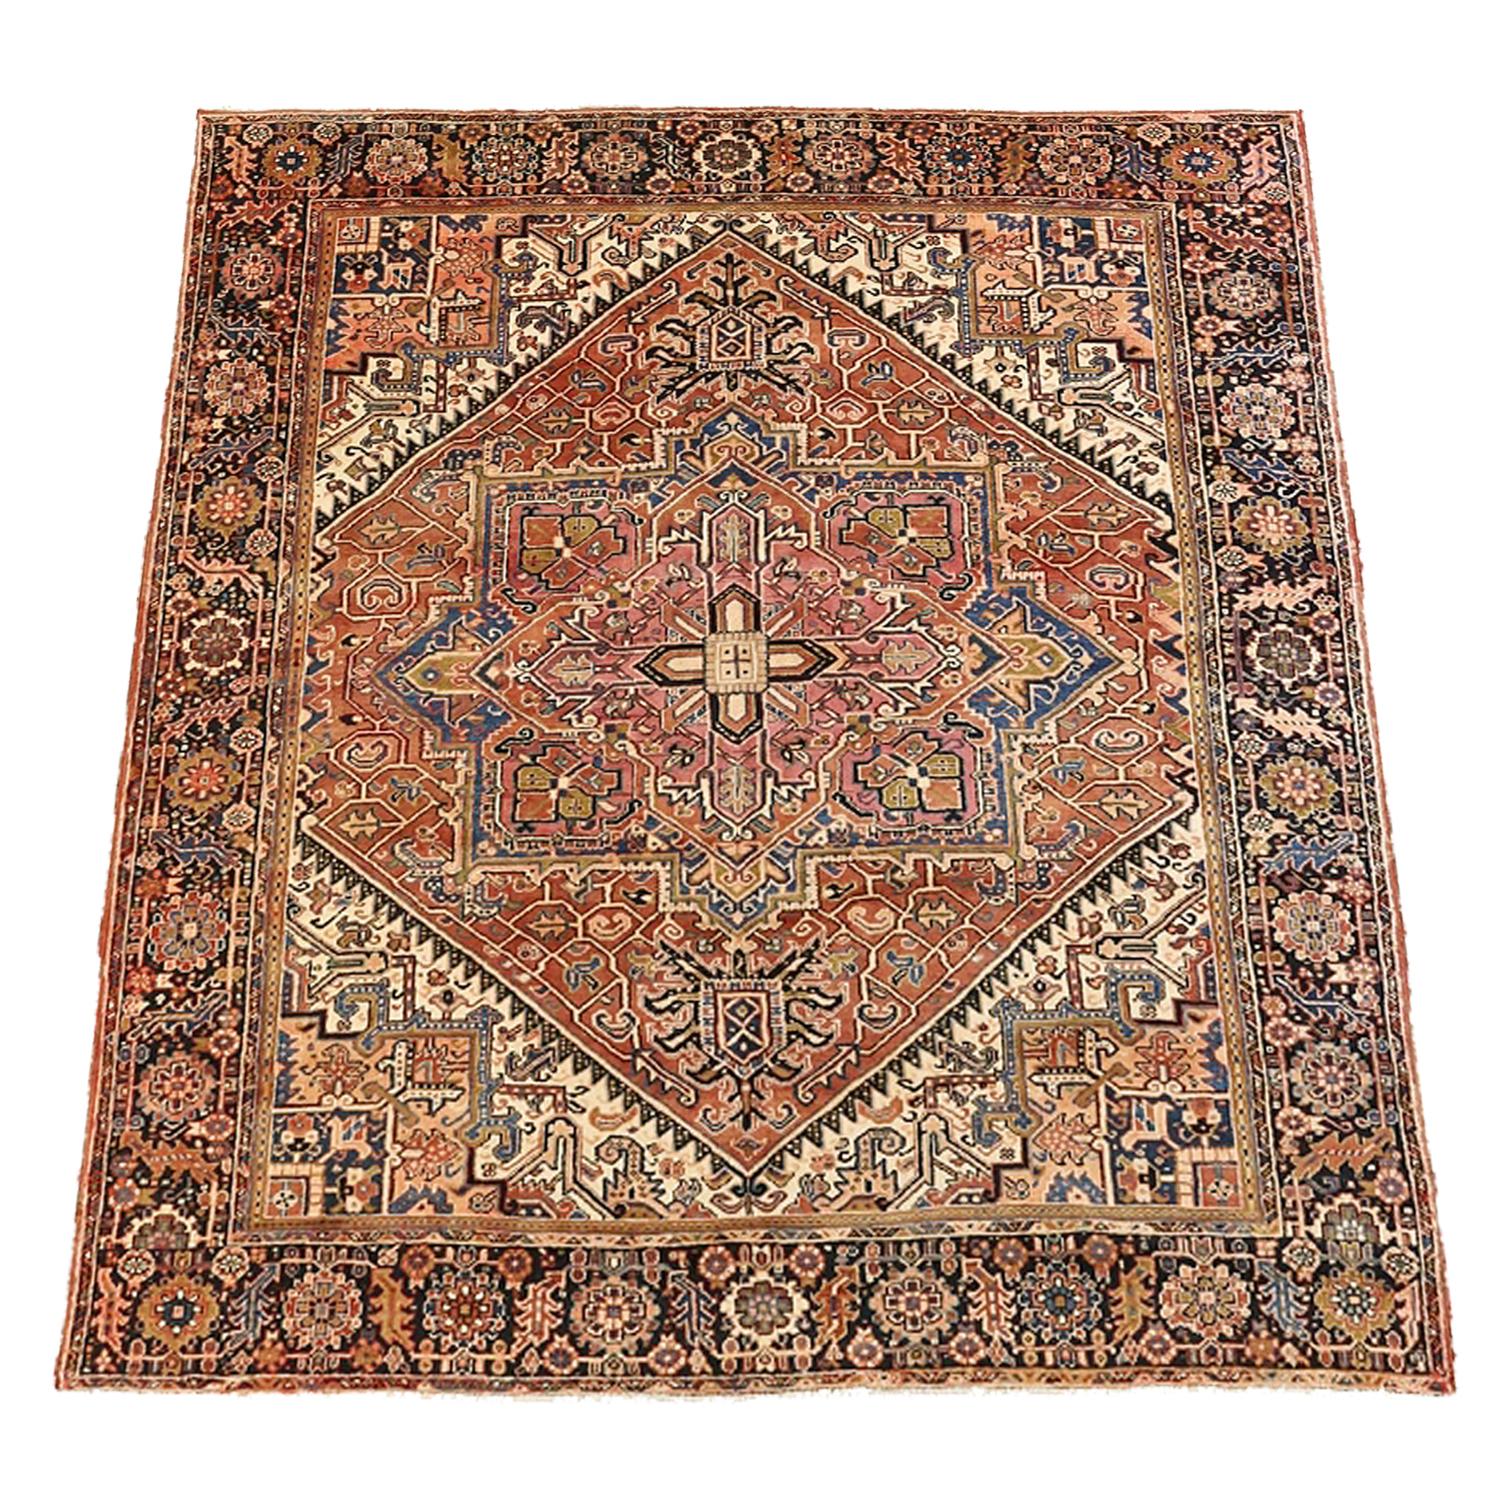 Contemporary Persian rug handwoven from the finest sheep’s wool and colored with all-natural vegetable dyes that are safe for humans and pets. It’s a traditional Heriz design featuring a lovely ivory field covered with black, blue, red and pink